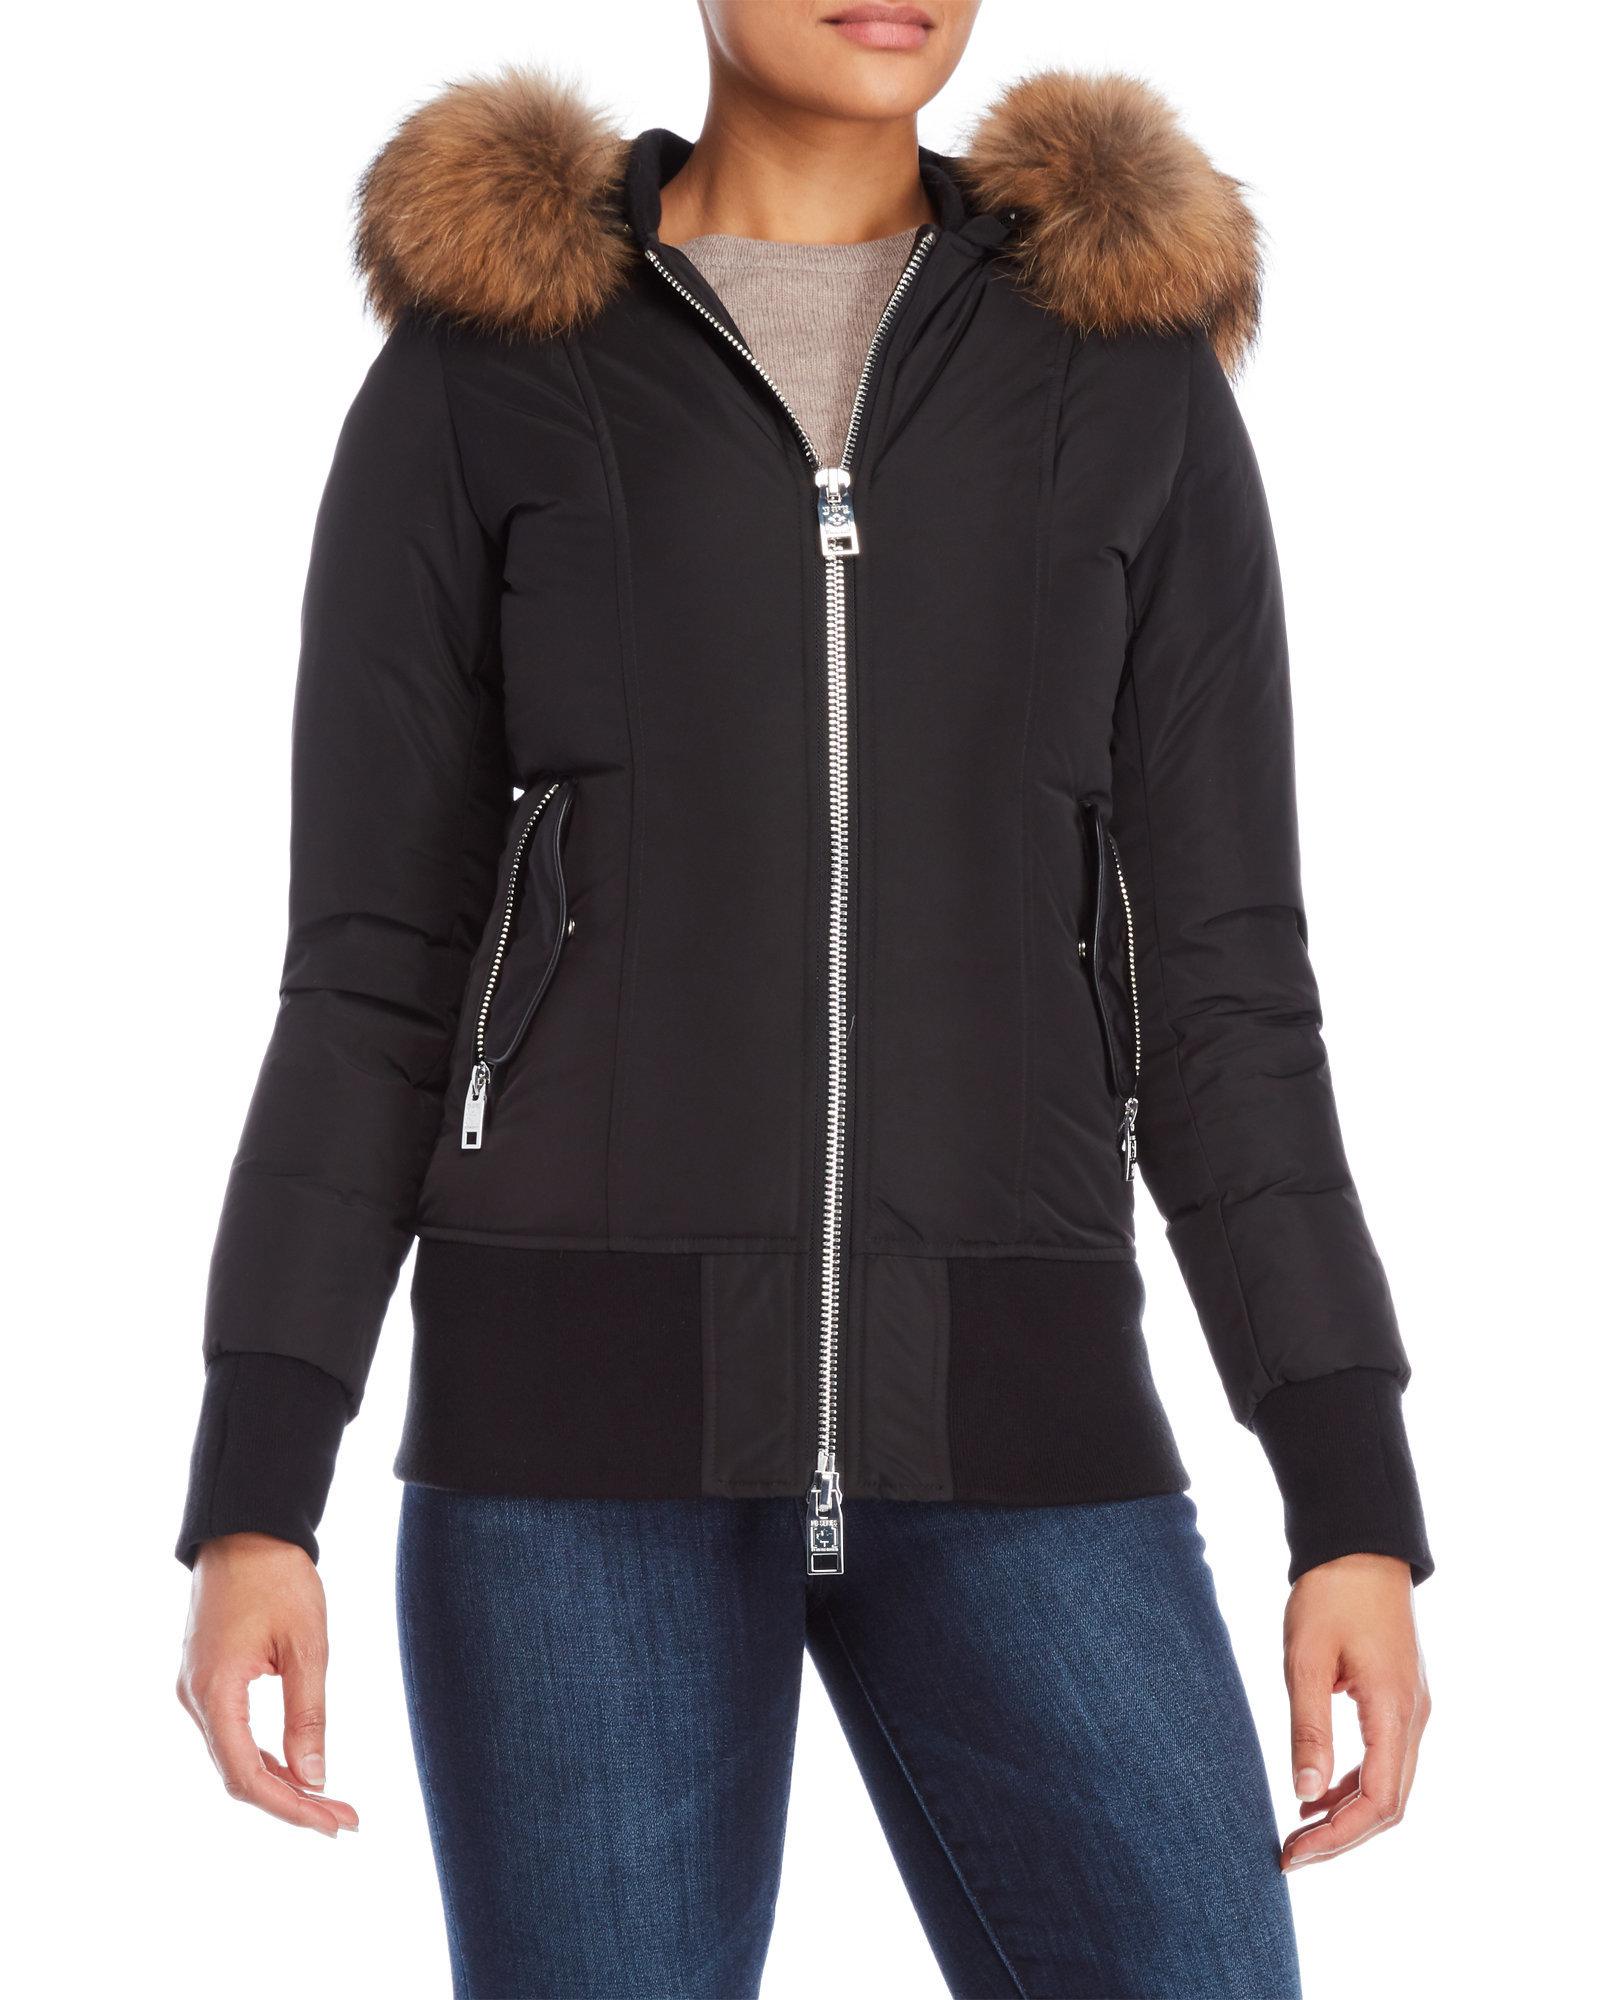 Nicole Benisti Synthetic Real Fur Trim Hooded Bomber Jacket in Black - Lyst